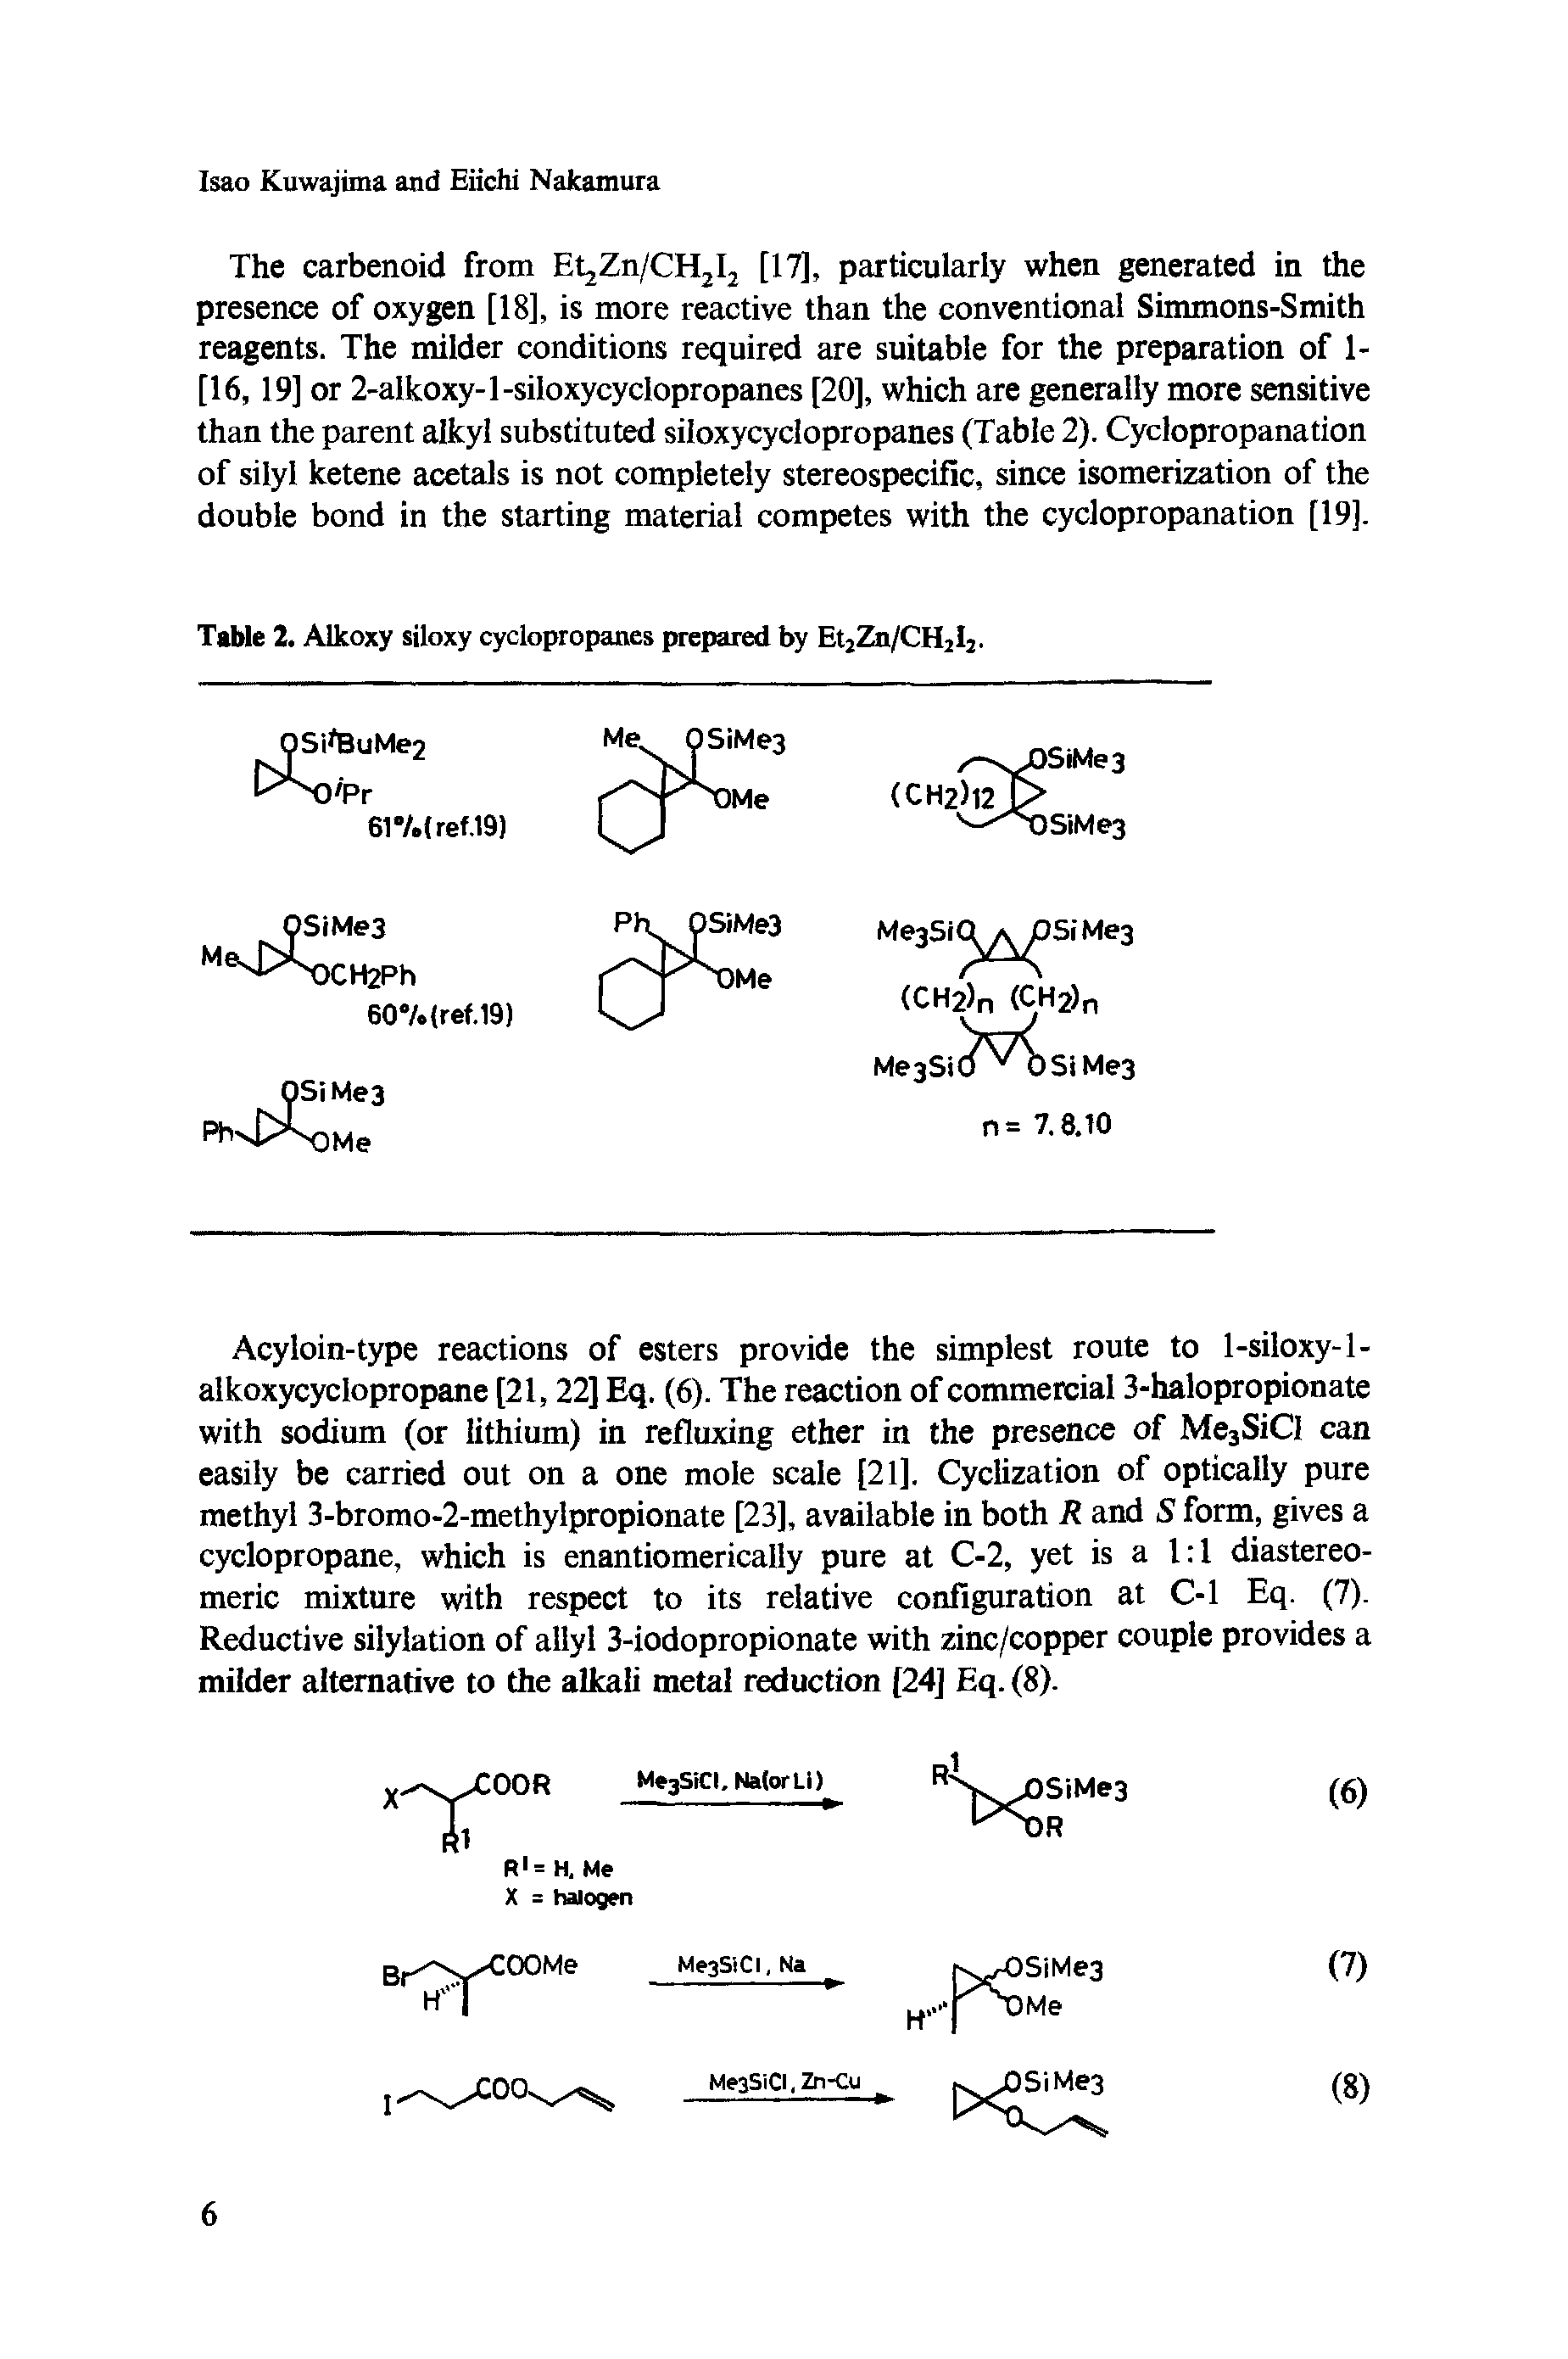 Table 2. Alkoxy siloxy cyclopropanes prepared by Et2Zn/CH2I2.